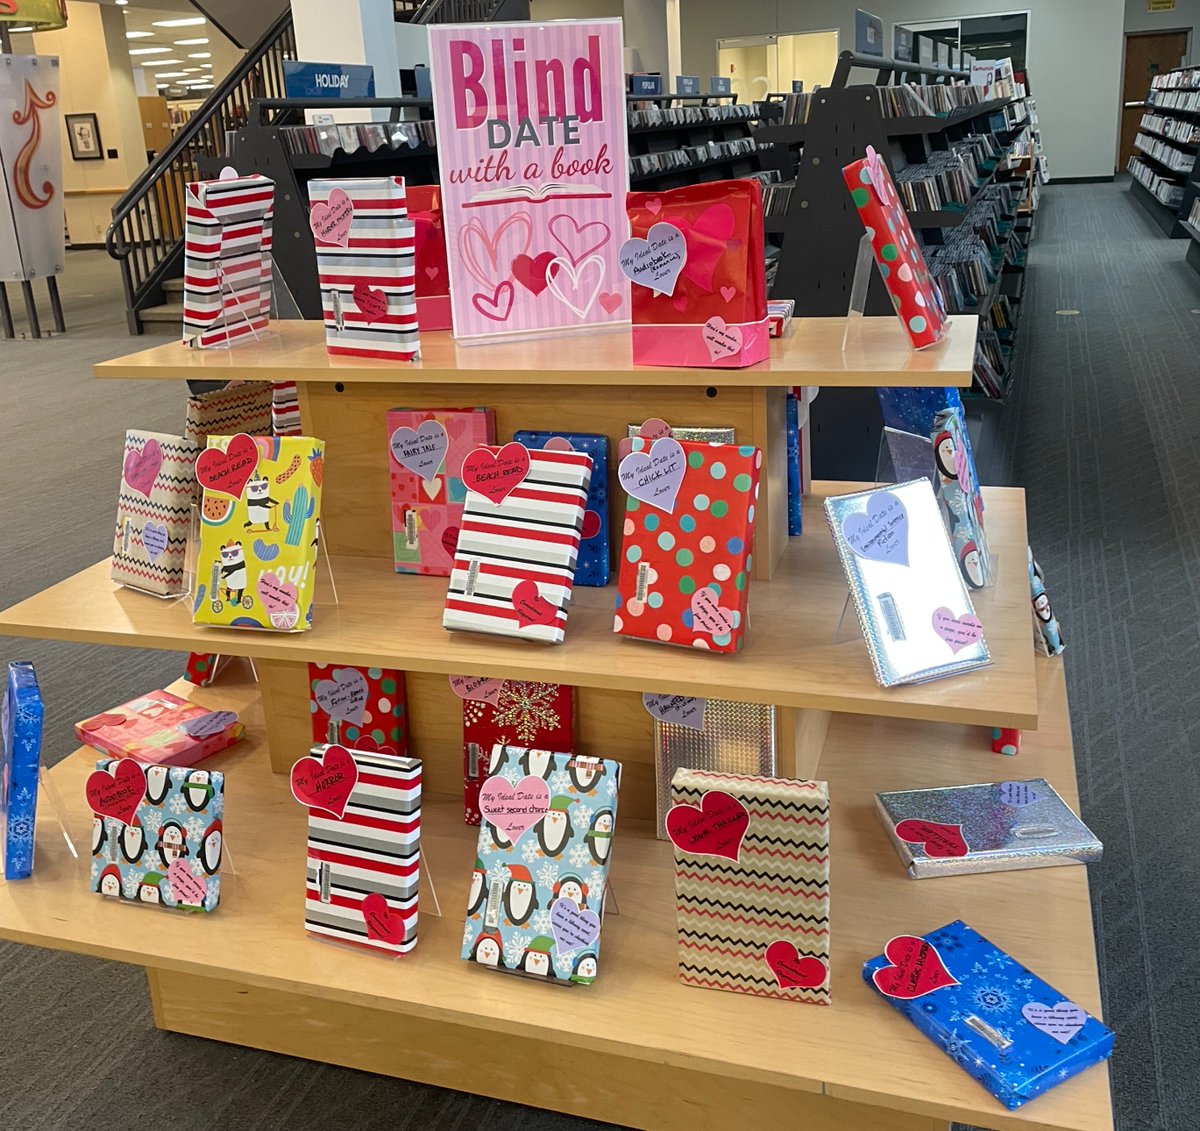 No big plans for Valentine's Day next week? The Waukesha Public Library has you covered... Blind Date with a Book!

#WaukeshaPublicLibrary #CreativeLibrarians #WeLoveOurLibrary